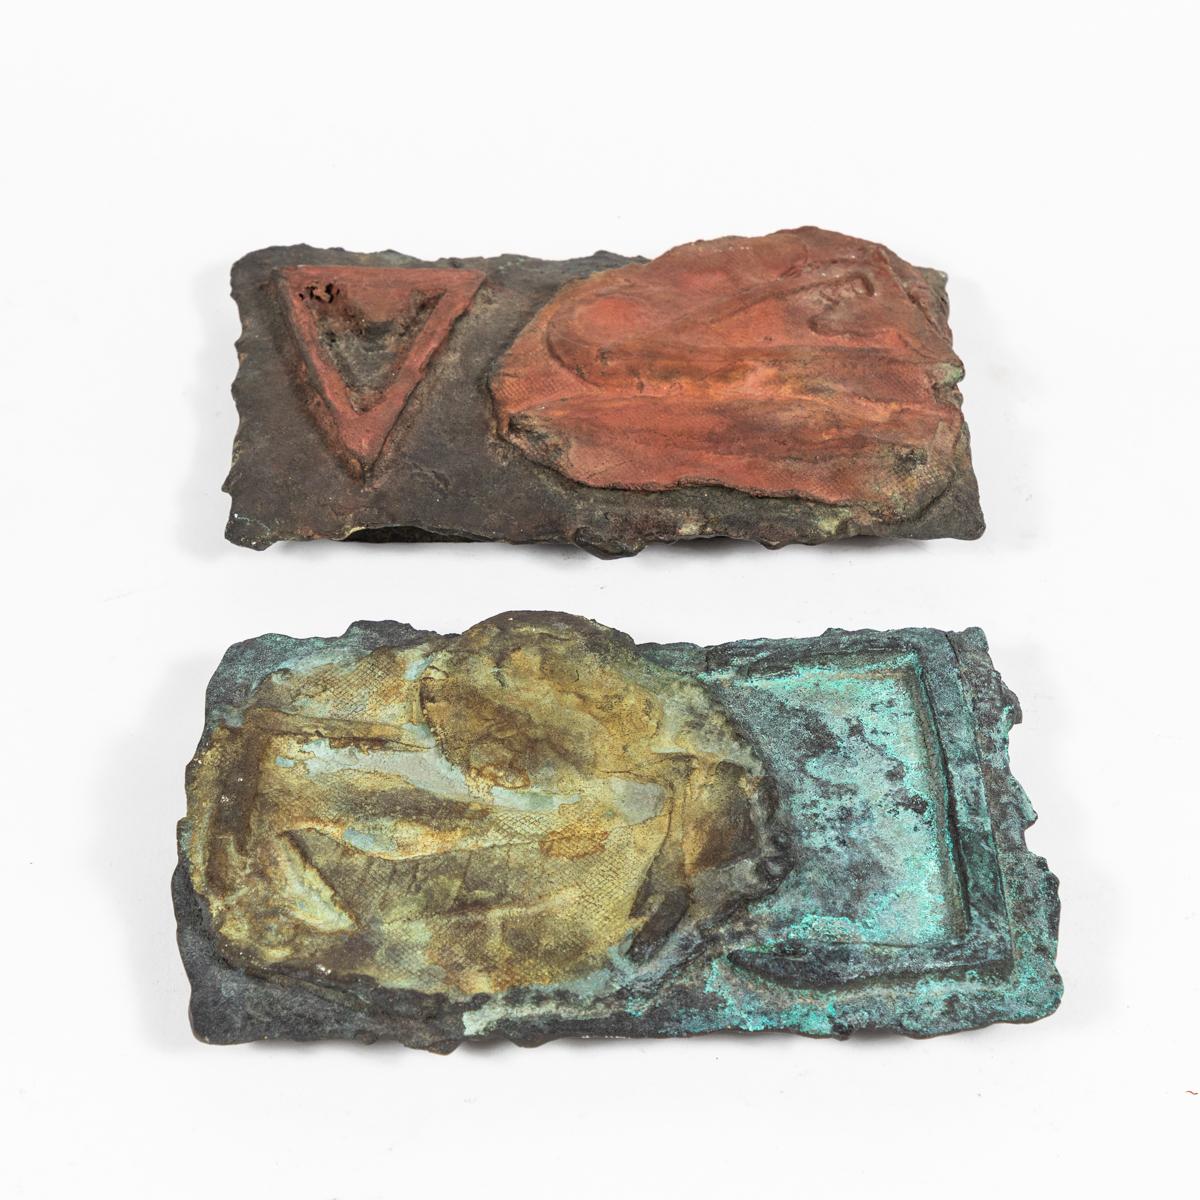 Pair of cast bronze Brutalist plaques with red, blue, and green painted decoration. The tactile nature of the piece makes a wonderful contrast with its rough-hewn industrial materials. A uniquely sculptural accent, these can be hung or displayed as